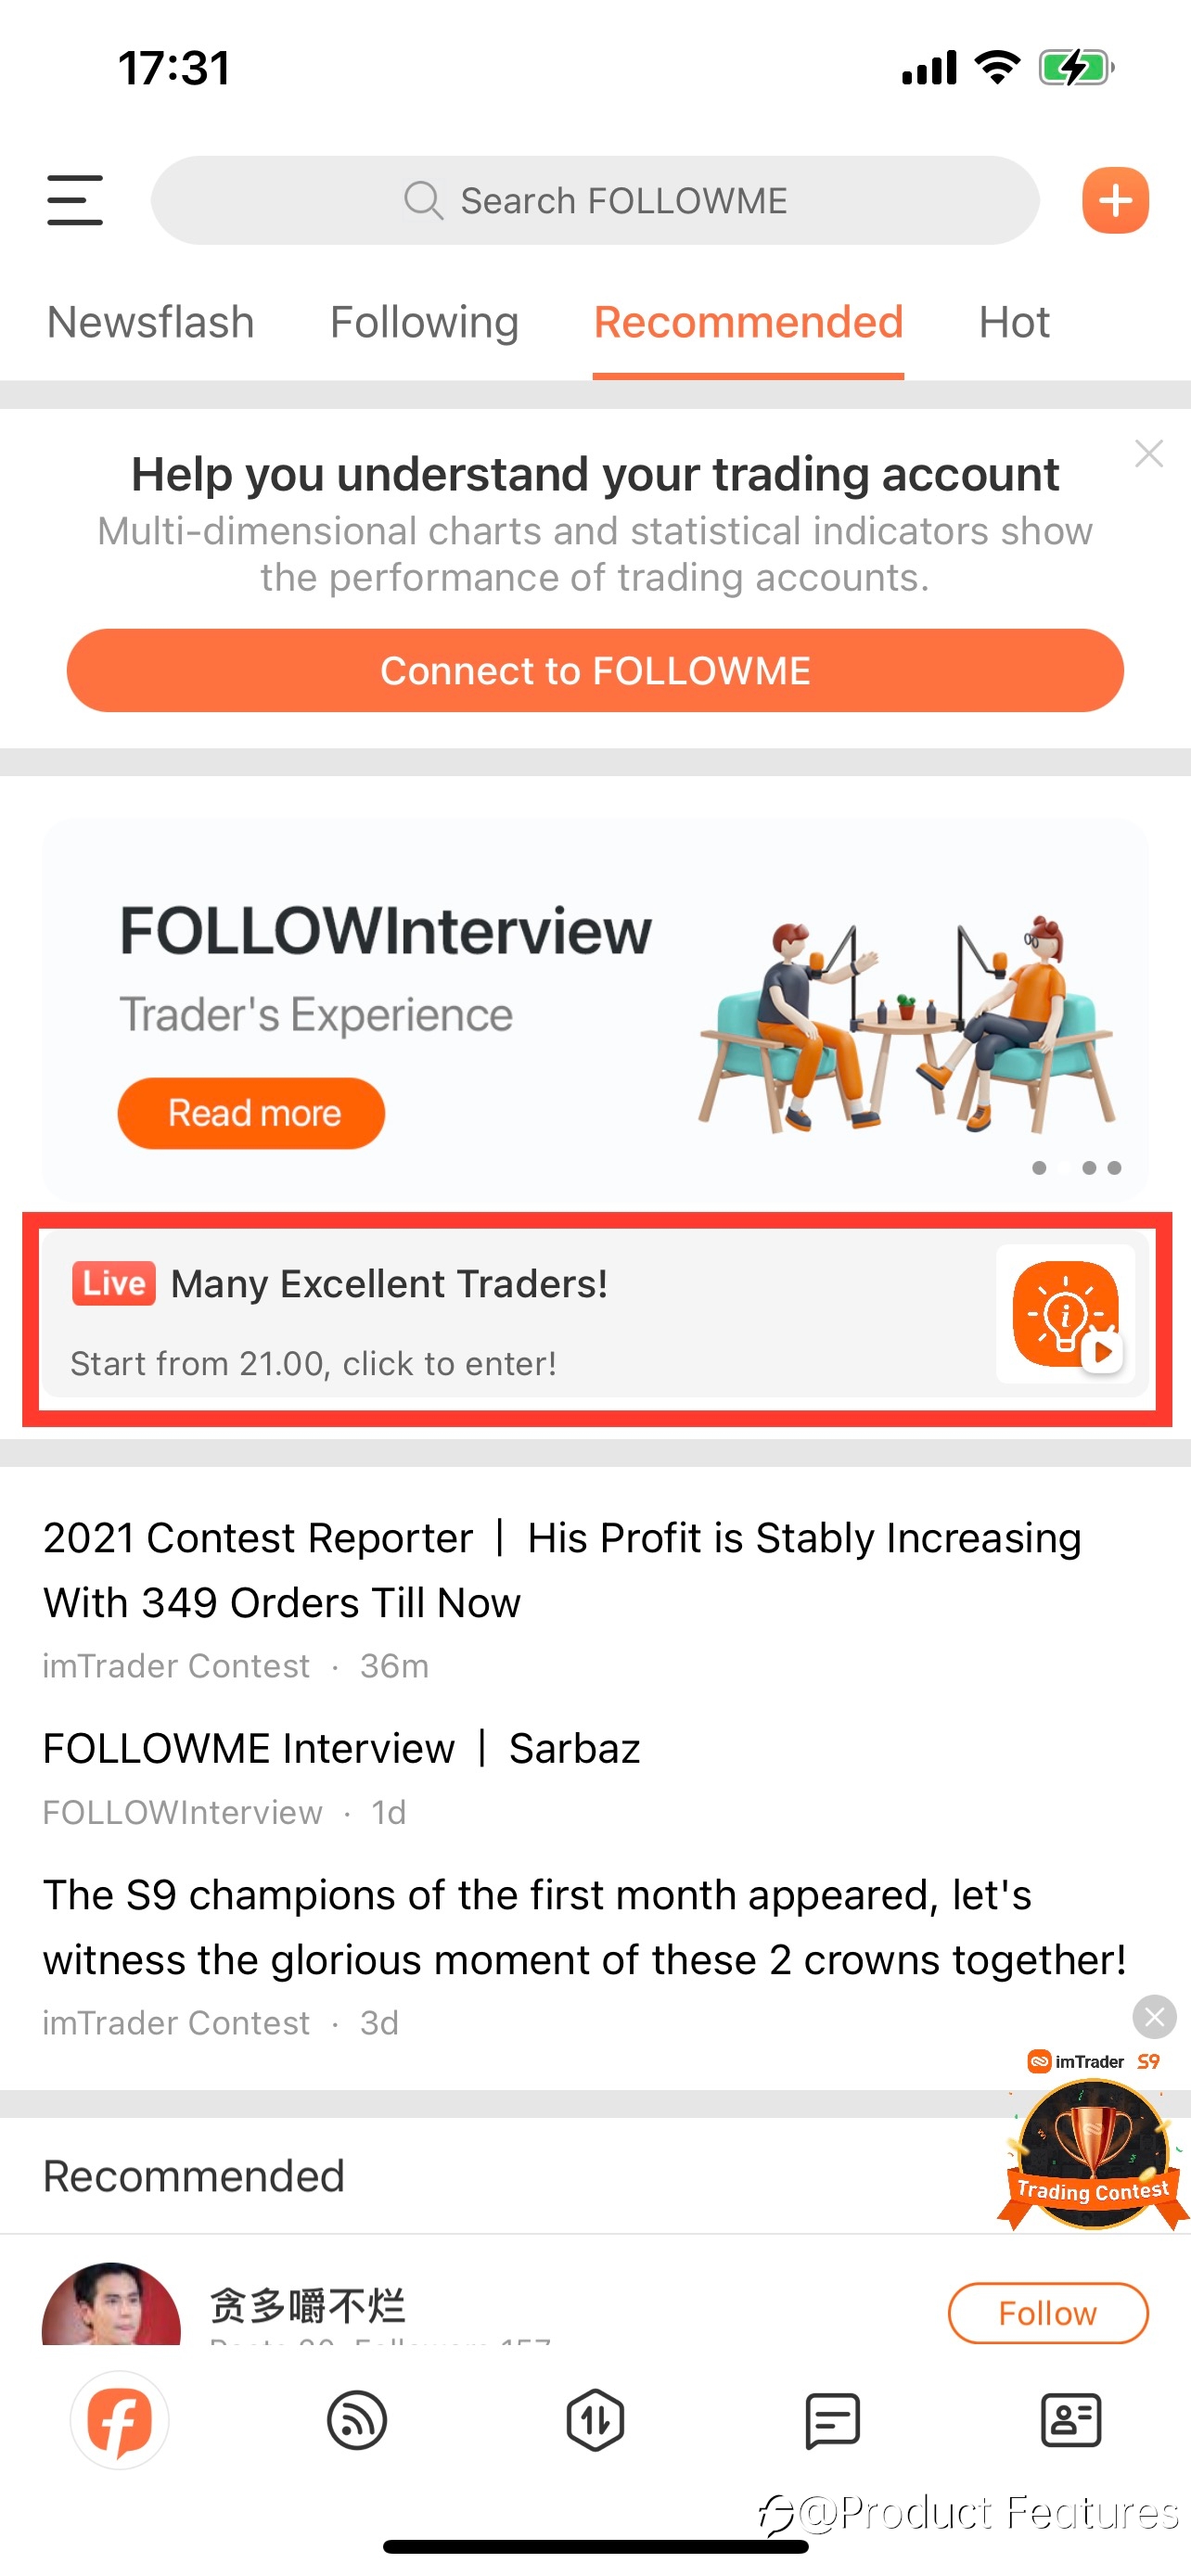 FOLLOWME APP Update: New experience of interact, new entrance for live